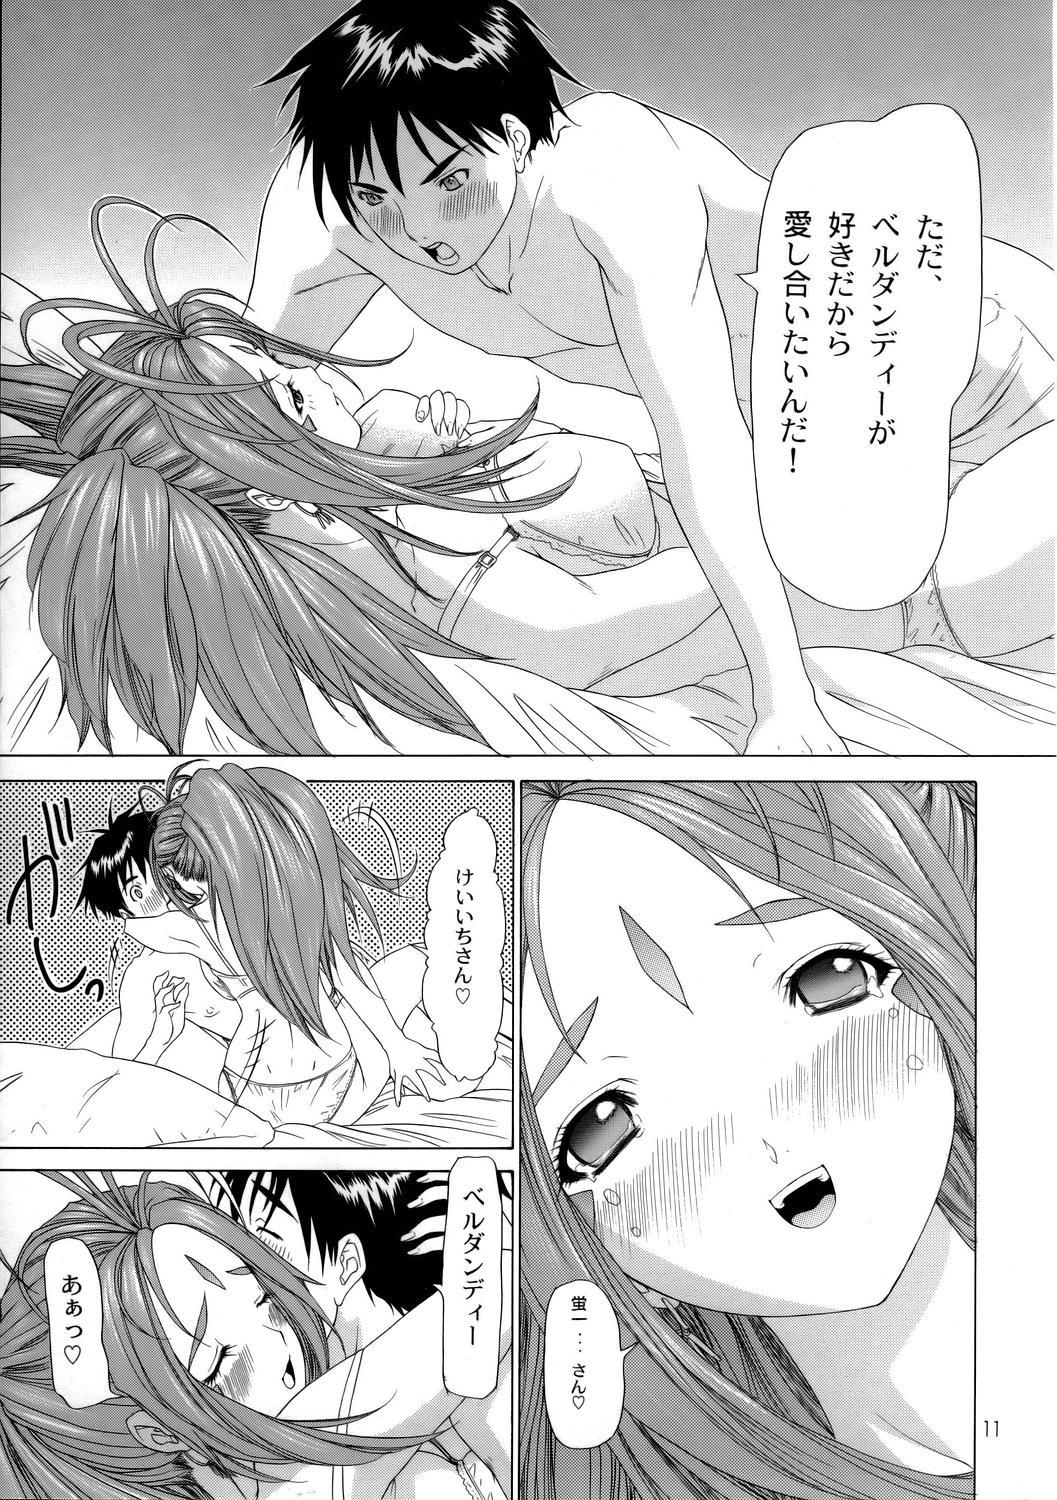 Boy Fuck Girl The sport of fortune - Ah my goddess Gayfuck - Page 12